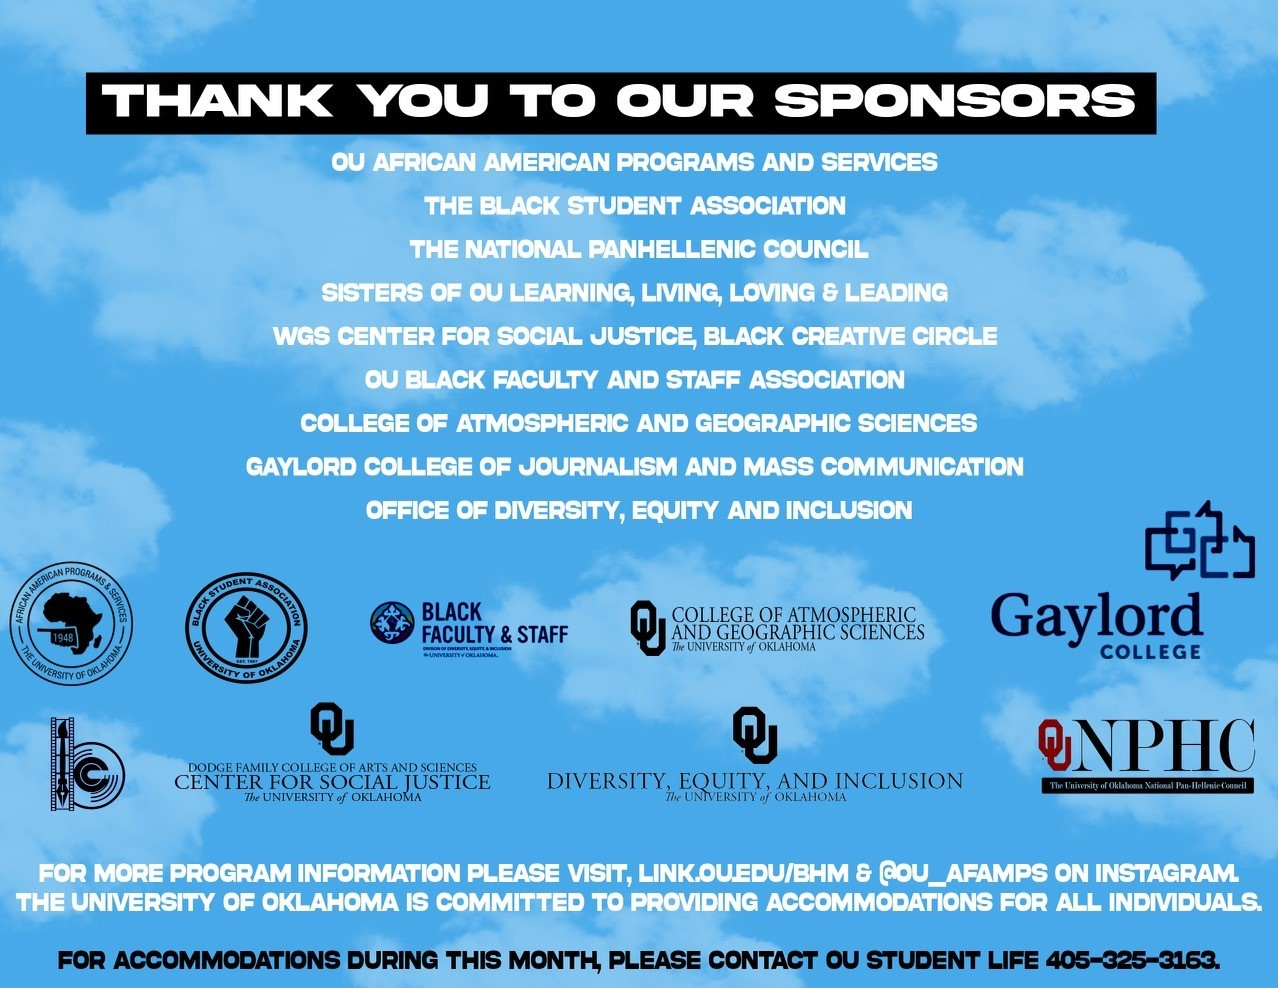 THANK YOU TO OUR SPONSORS OU AFRICAN AMERICAN PROGRAMS AND SERVICES THE BLACK STUDENT ASSOCIATION THE NATIONAL PANHELLENIC COUNCIL SISTERS OF OU LEARNING, LIVING, LOVING & LEADING WGS CENTER FOR SOCIAL JUSTICE, BLACK CREATIVE CIRCLE OU BLACK FACULTY AND STAFF ASSOCIATION COLLEGE OF ATMOSPHERIC AND GEOGRAPHIC SCIENCES GAYLORD COLLEGE OF JOURNALISM AND MASS COMMUNICATION OFFICE OF DIVERSITY, EQUITY AND INCLUSION with various sponsor logos. FOR MORE PROGRAM INFORMATION PLEASE VISIT, LINK.OUEDU/BHM& @OU_AFAMPS ON INSTAGRAM. THE UNIVERSITY OF OKLAHOMA IS COMMITTED TO PROVIDING ACCOMMODATIONS FOR ALL INDIVIDUALS FOR ACCOMMODATIONS DURING THIS MONTH PLEASE CONTACT OU STUDENT LIFE 405-325-3163.